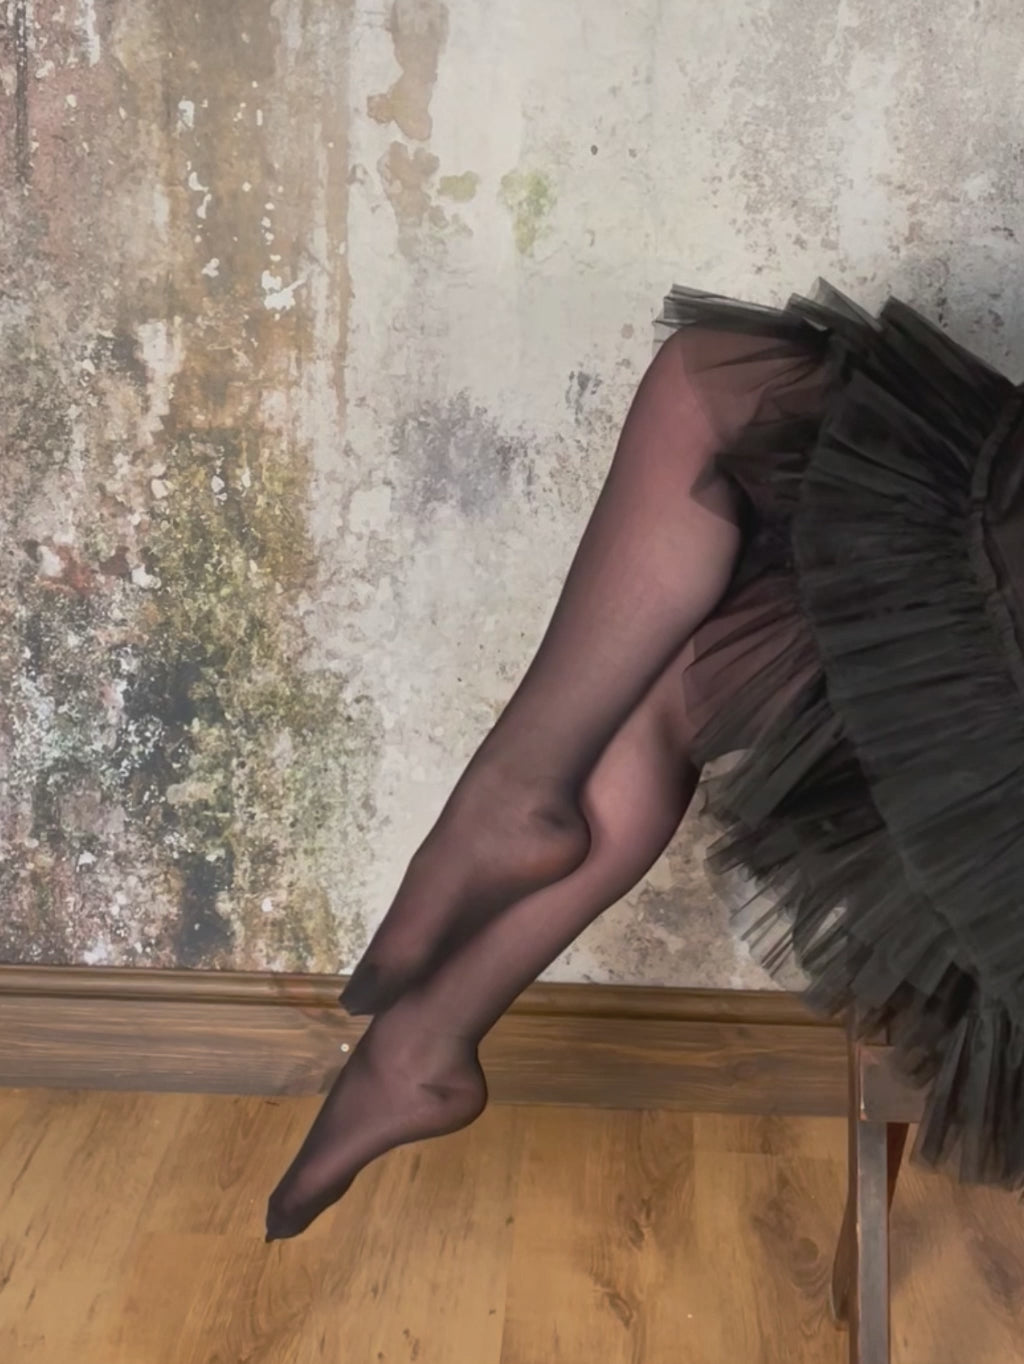 Vintage Martyn Fisher Stockings video